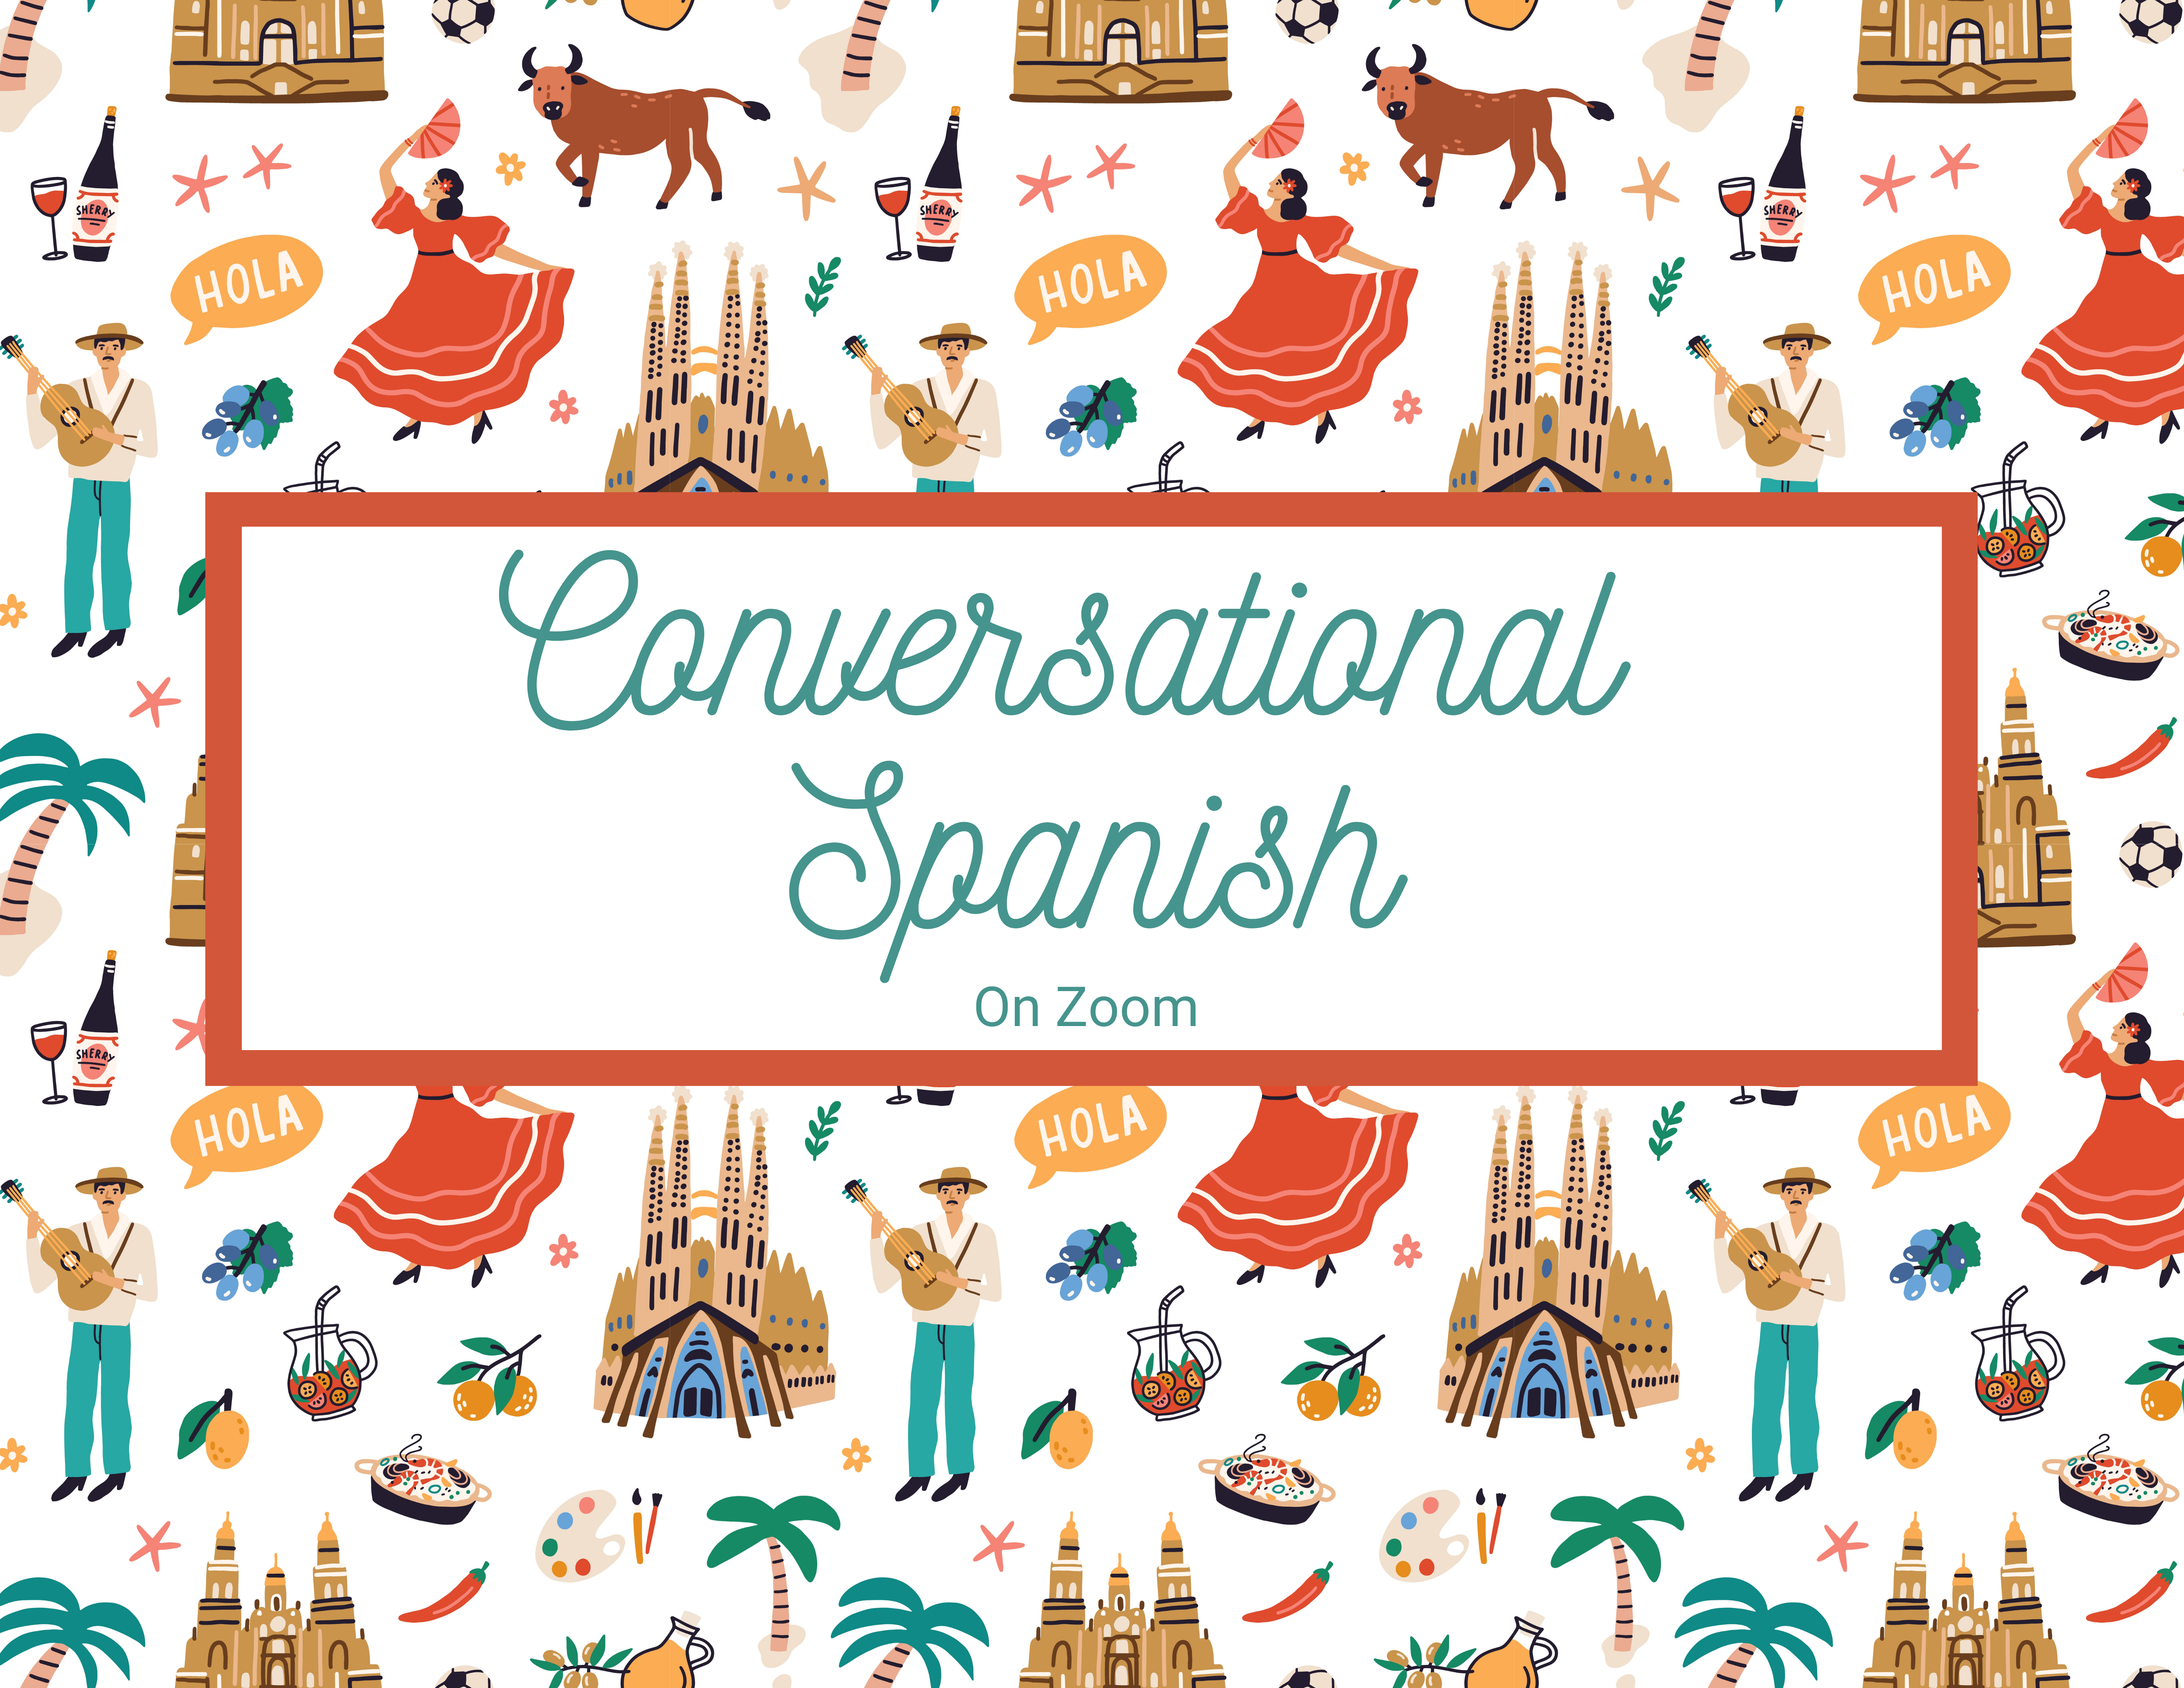 [A collage of Spanish images on a white background] Conversational Spanish | On Zoom 